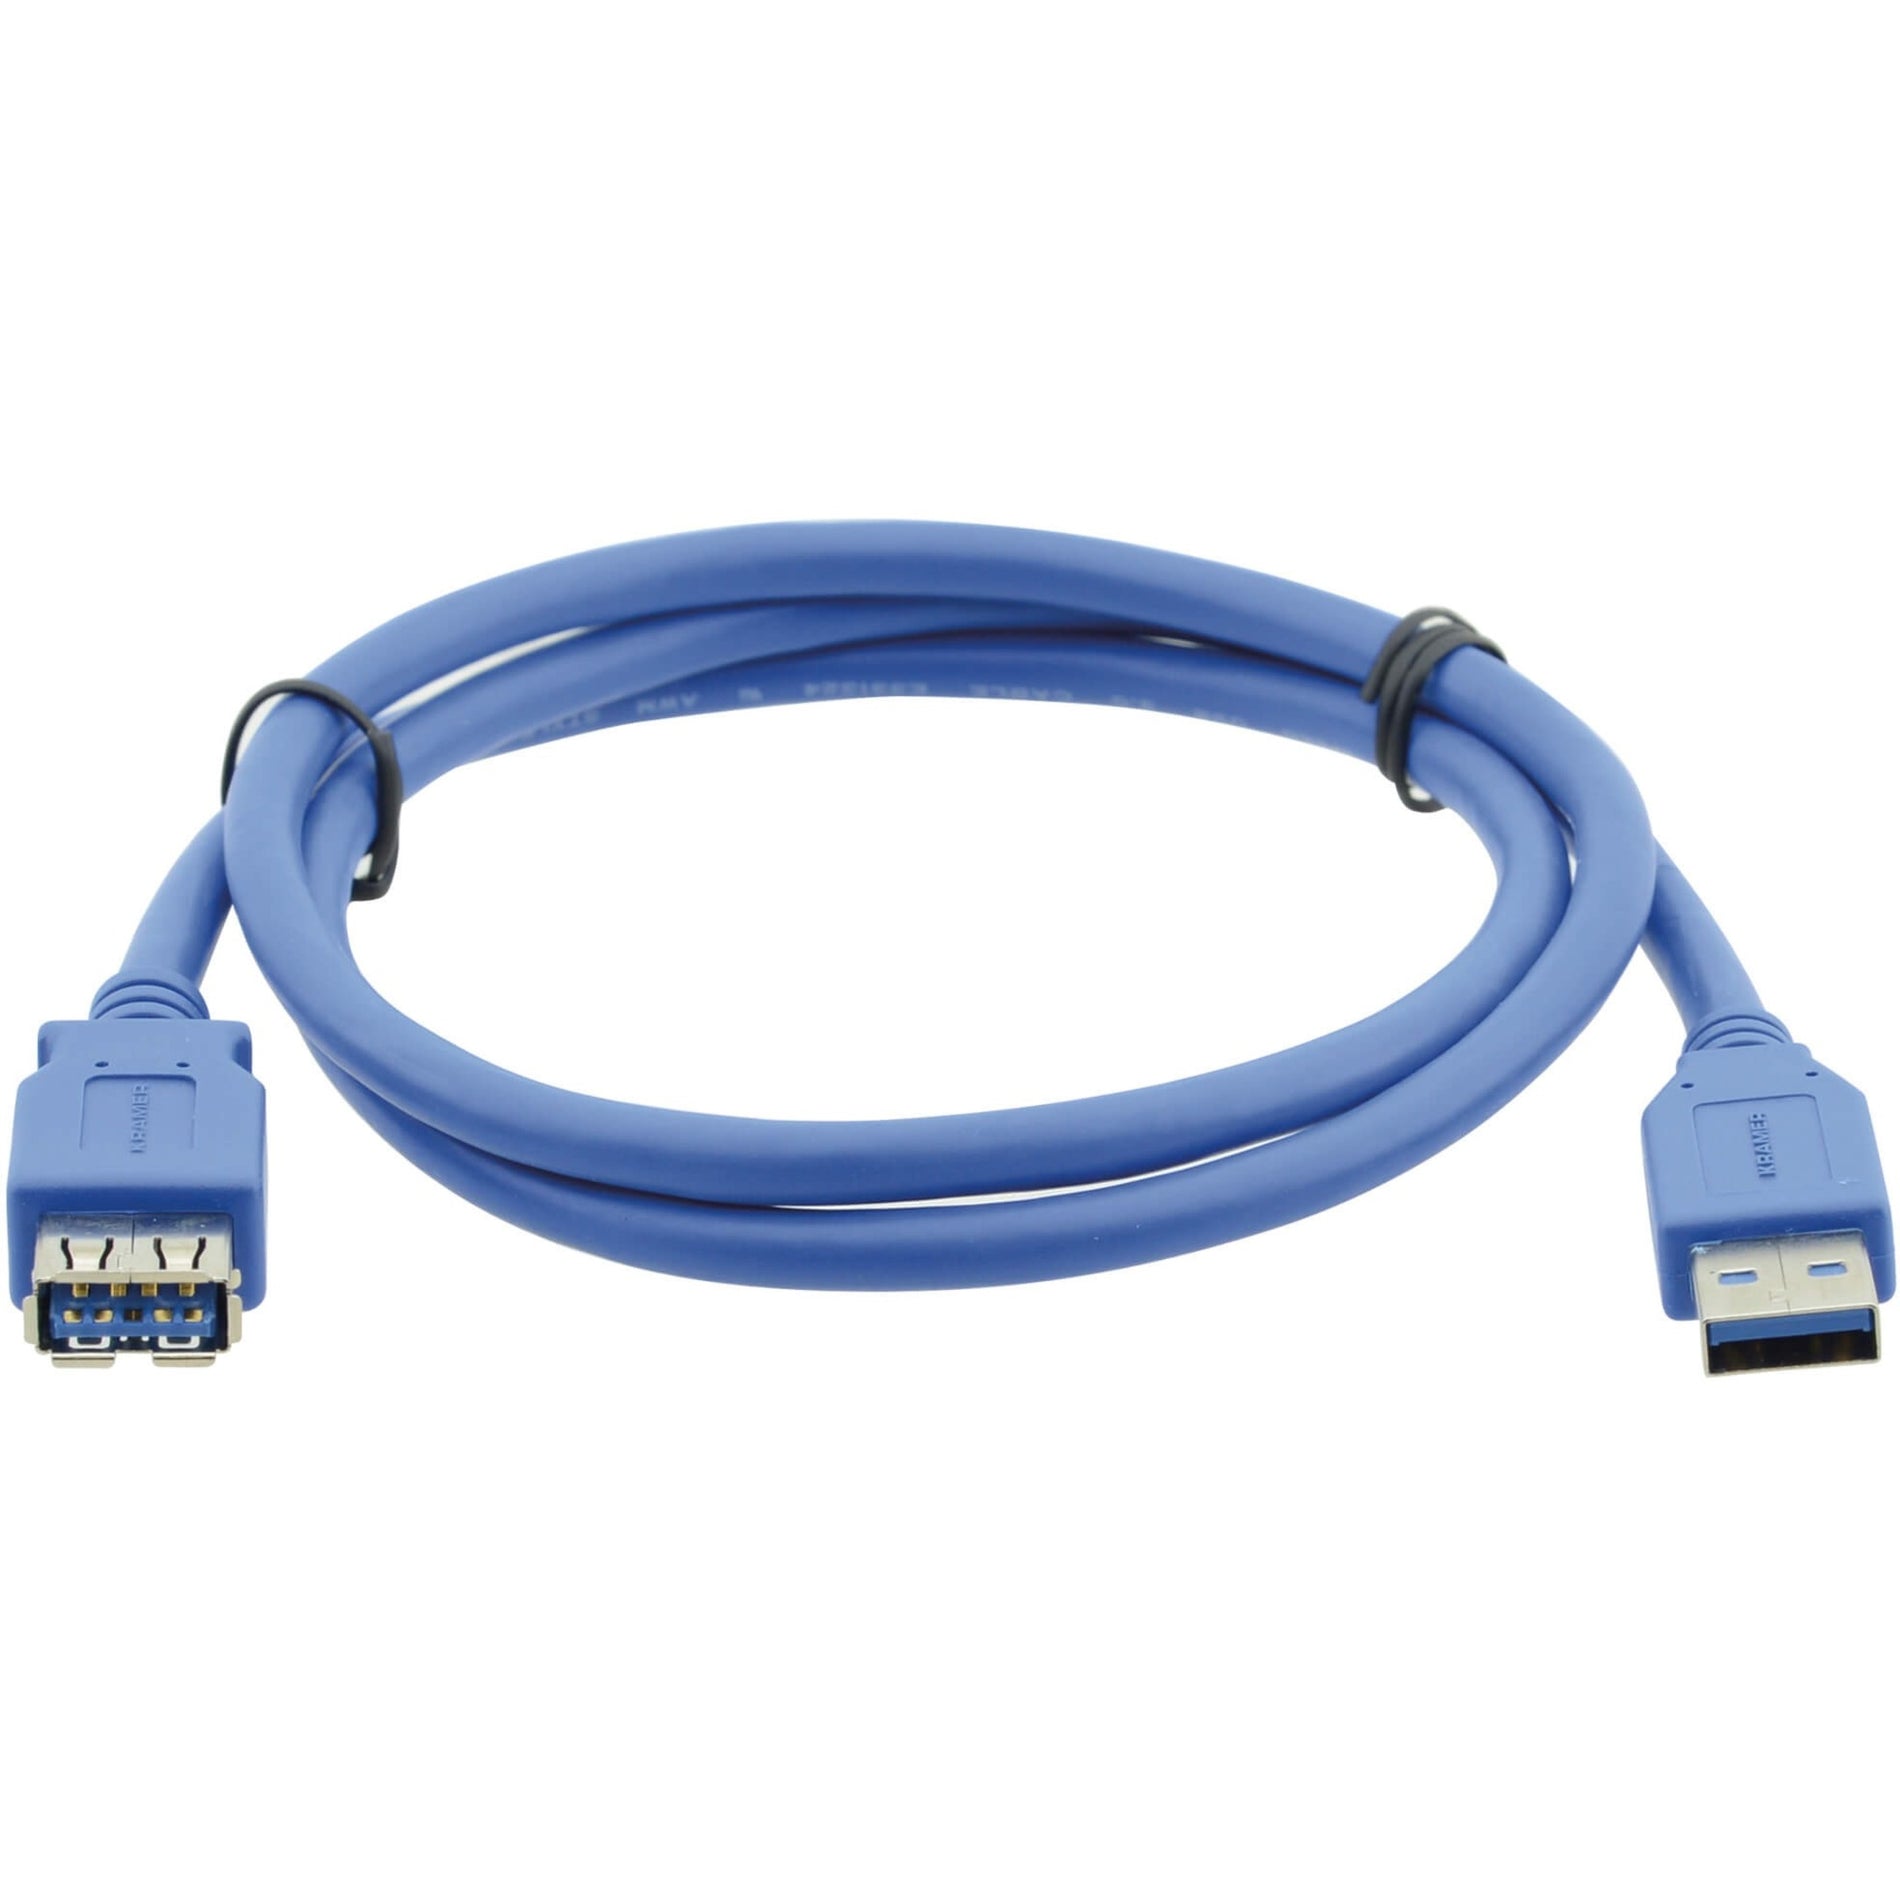 Kramer 96-02310003 USB 3.0 A (M) to A (F) Extension Cable, 3 ft, Strain Relief, EMI/RF Protection